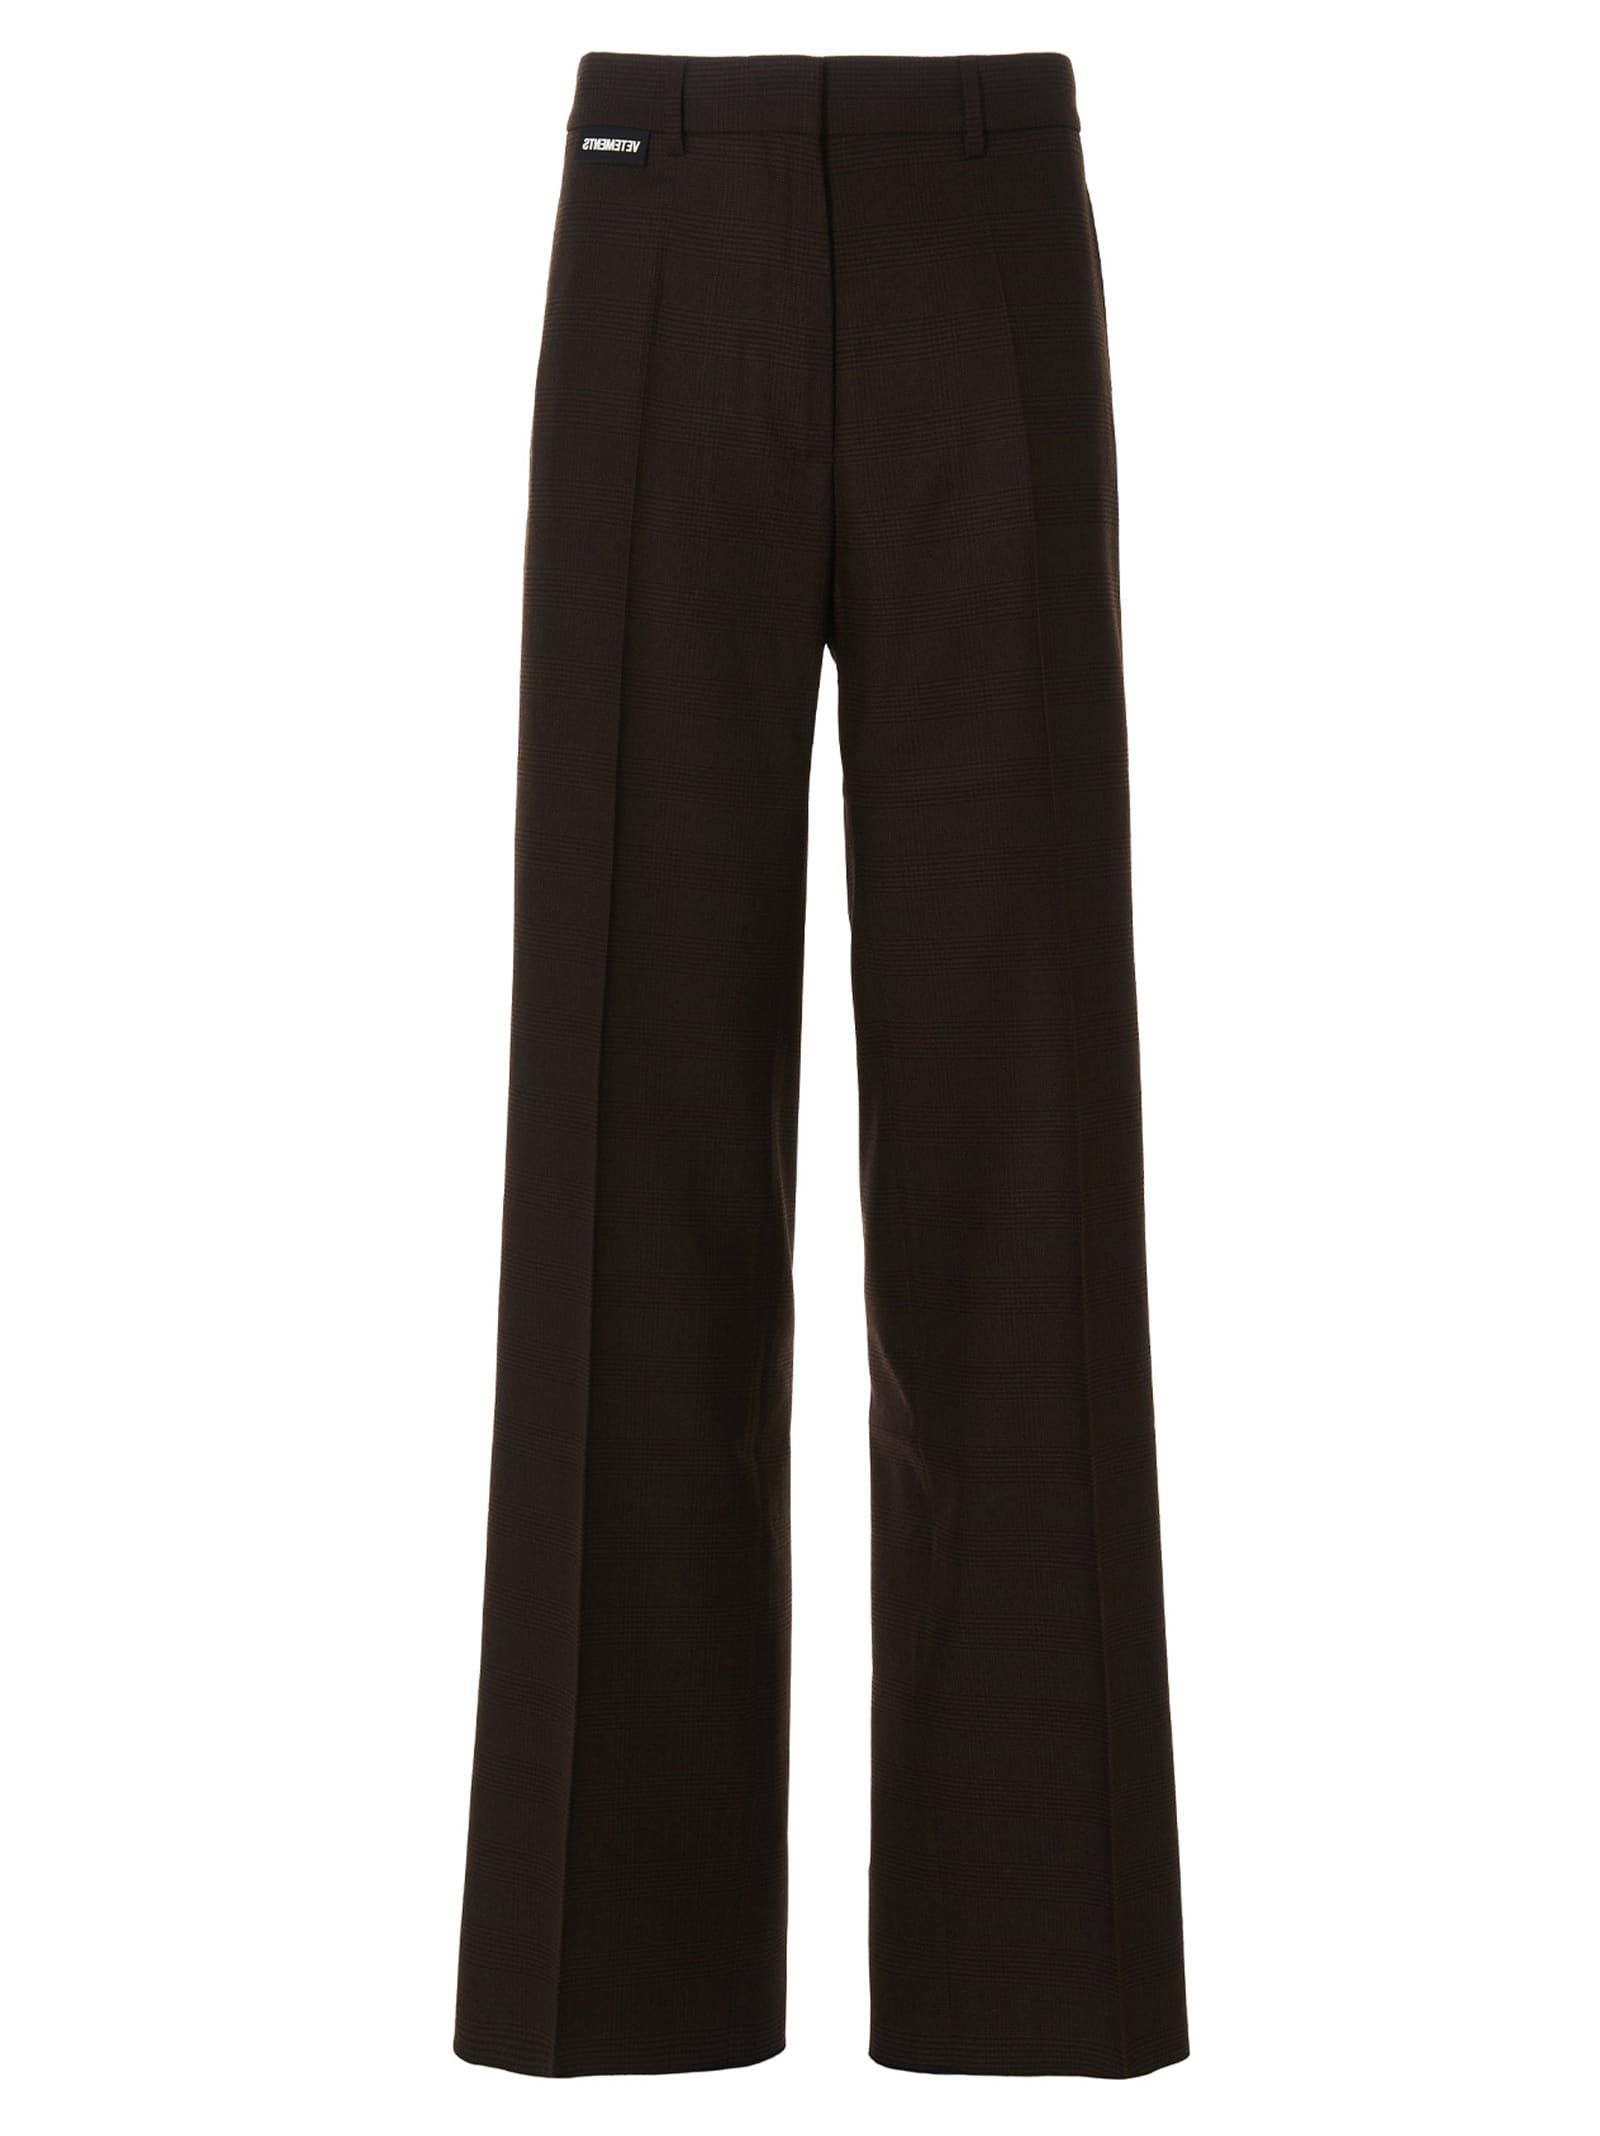 VETEMENTS Tailored Wool Trousers